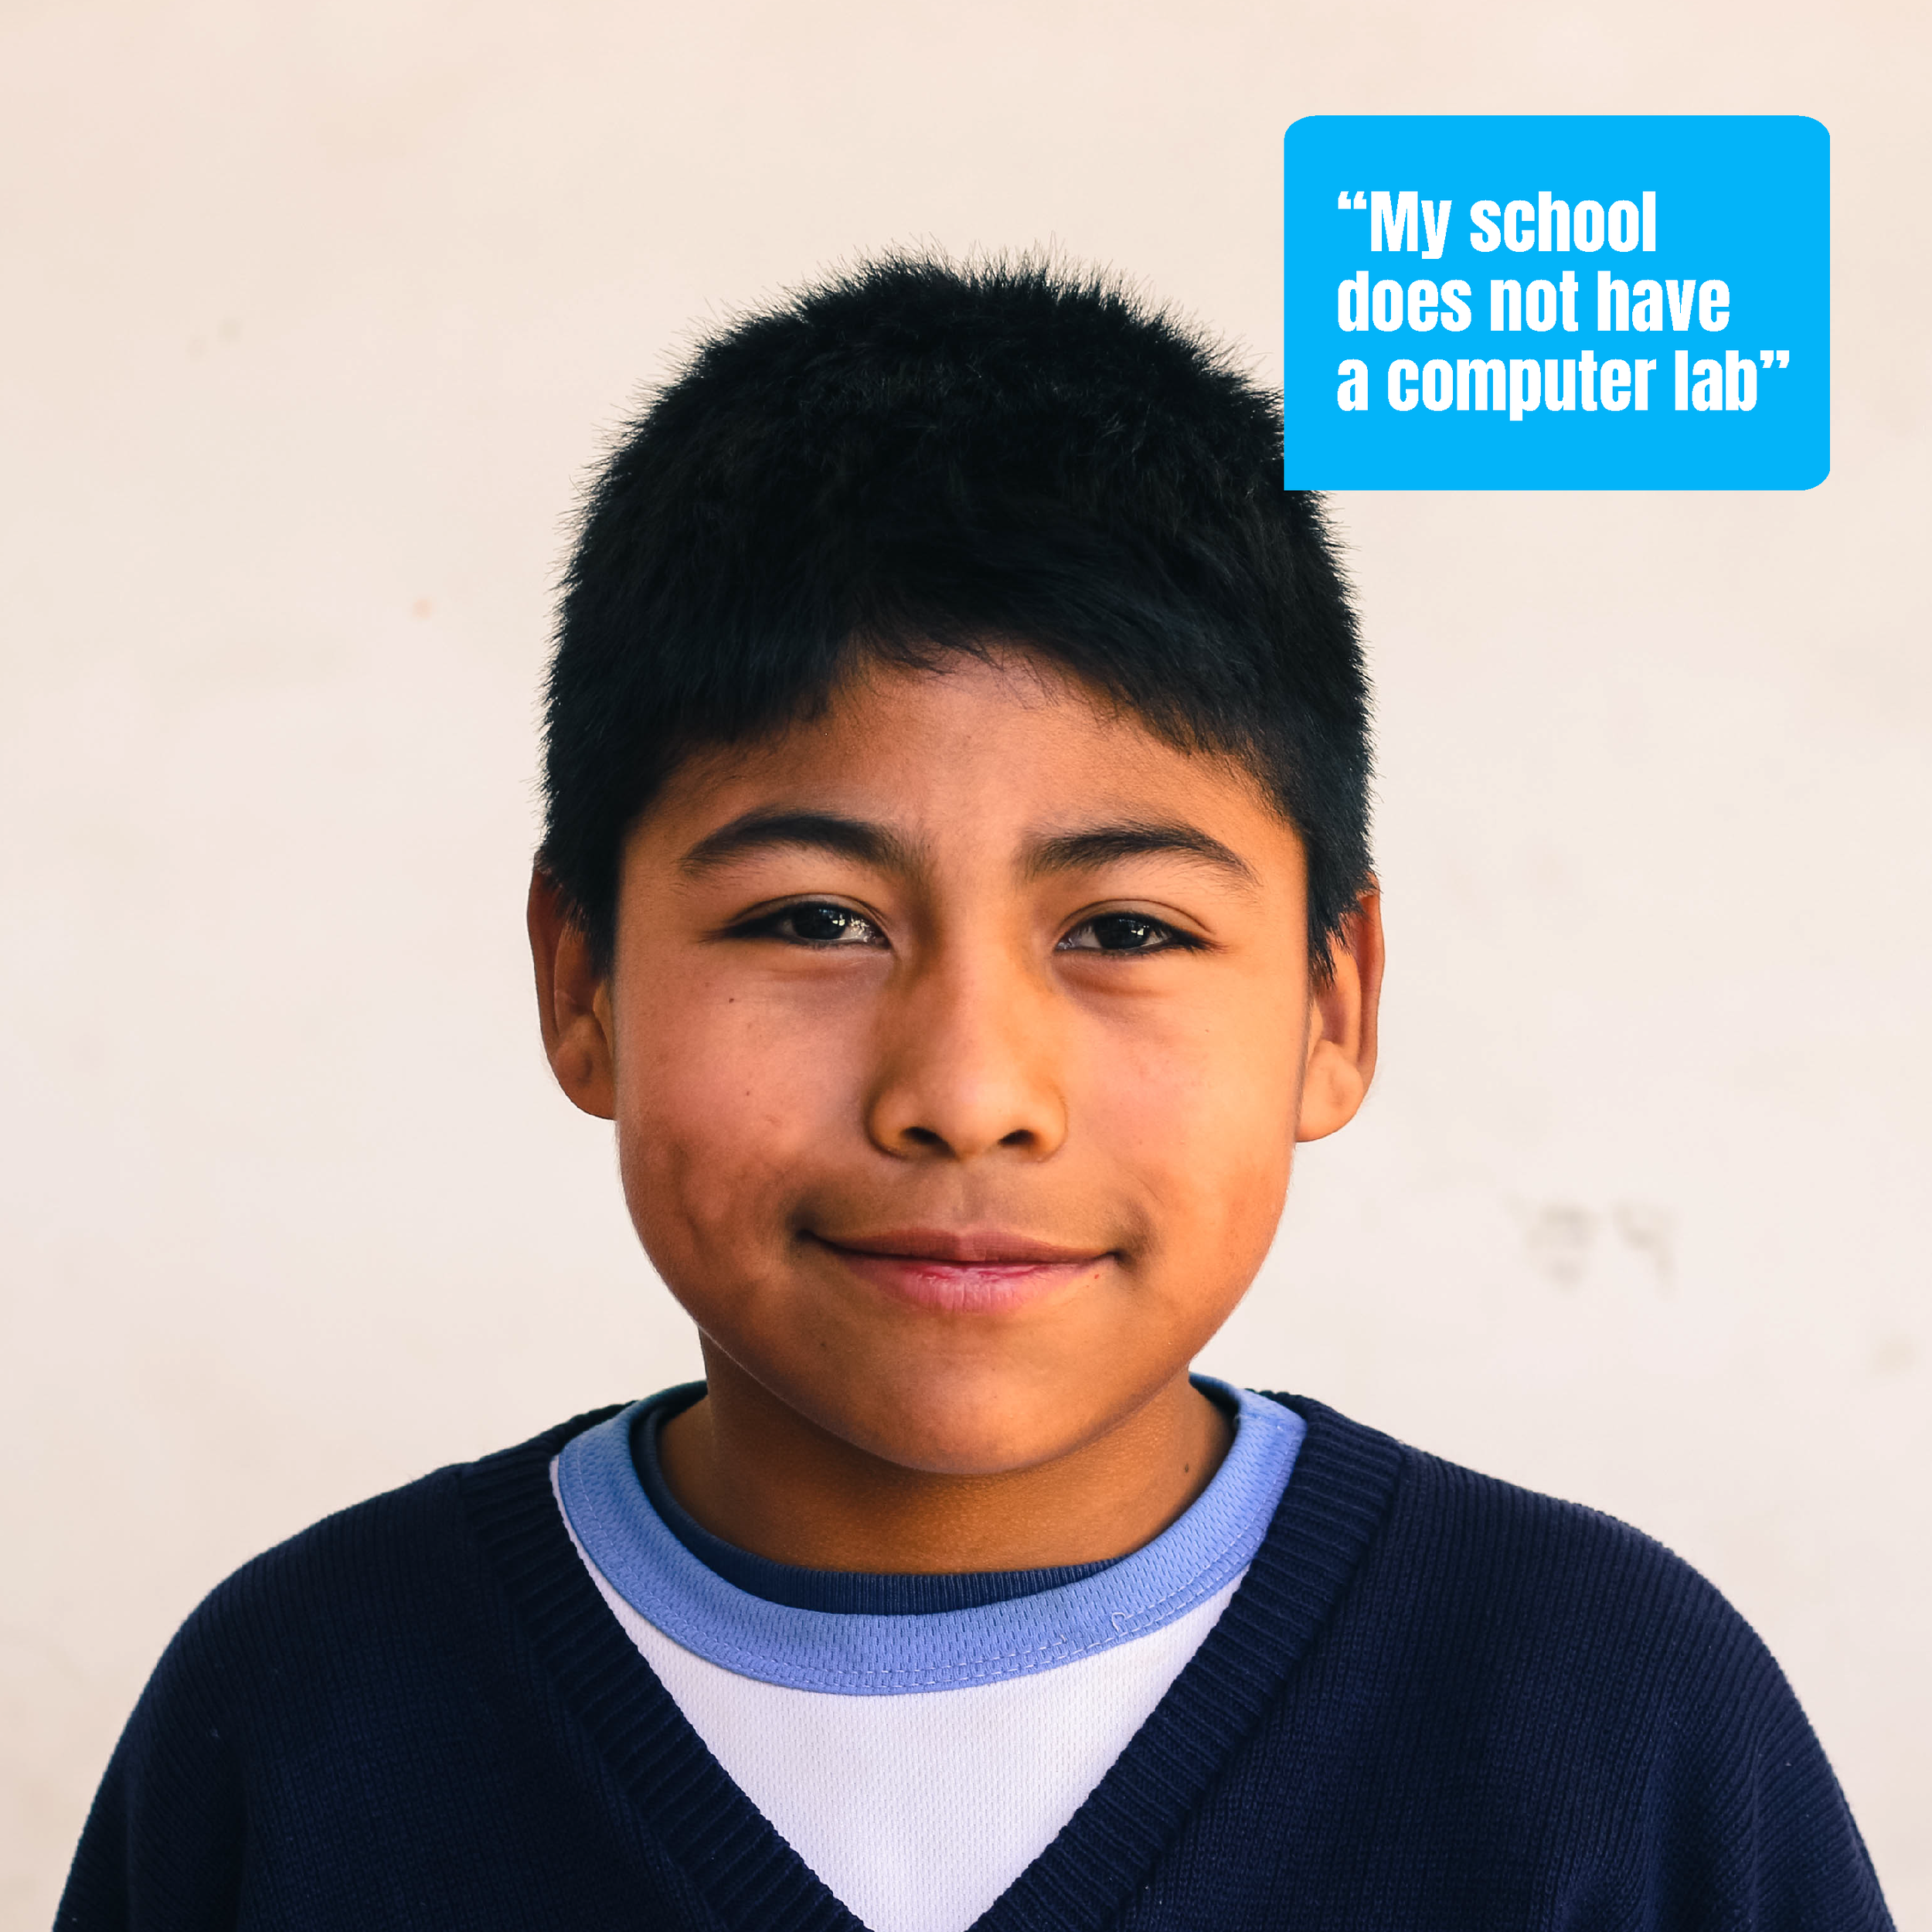  Today Guatemala has over 18 thousand elementary public schools, and 90% of those lack access to technology. 